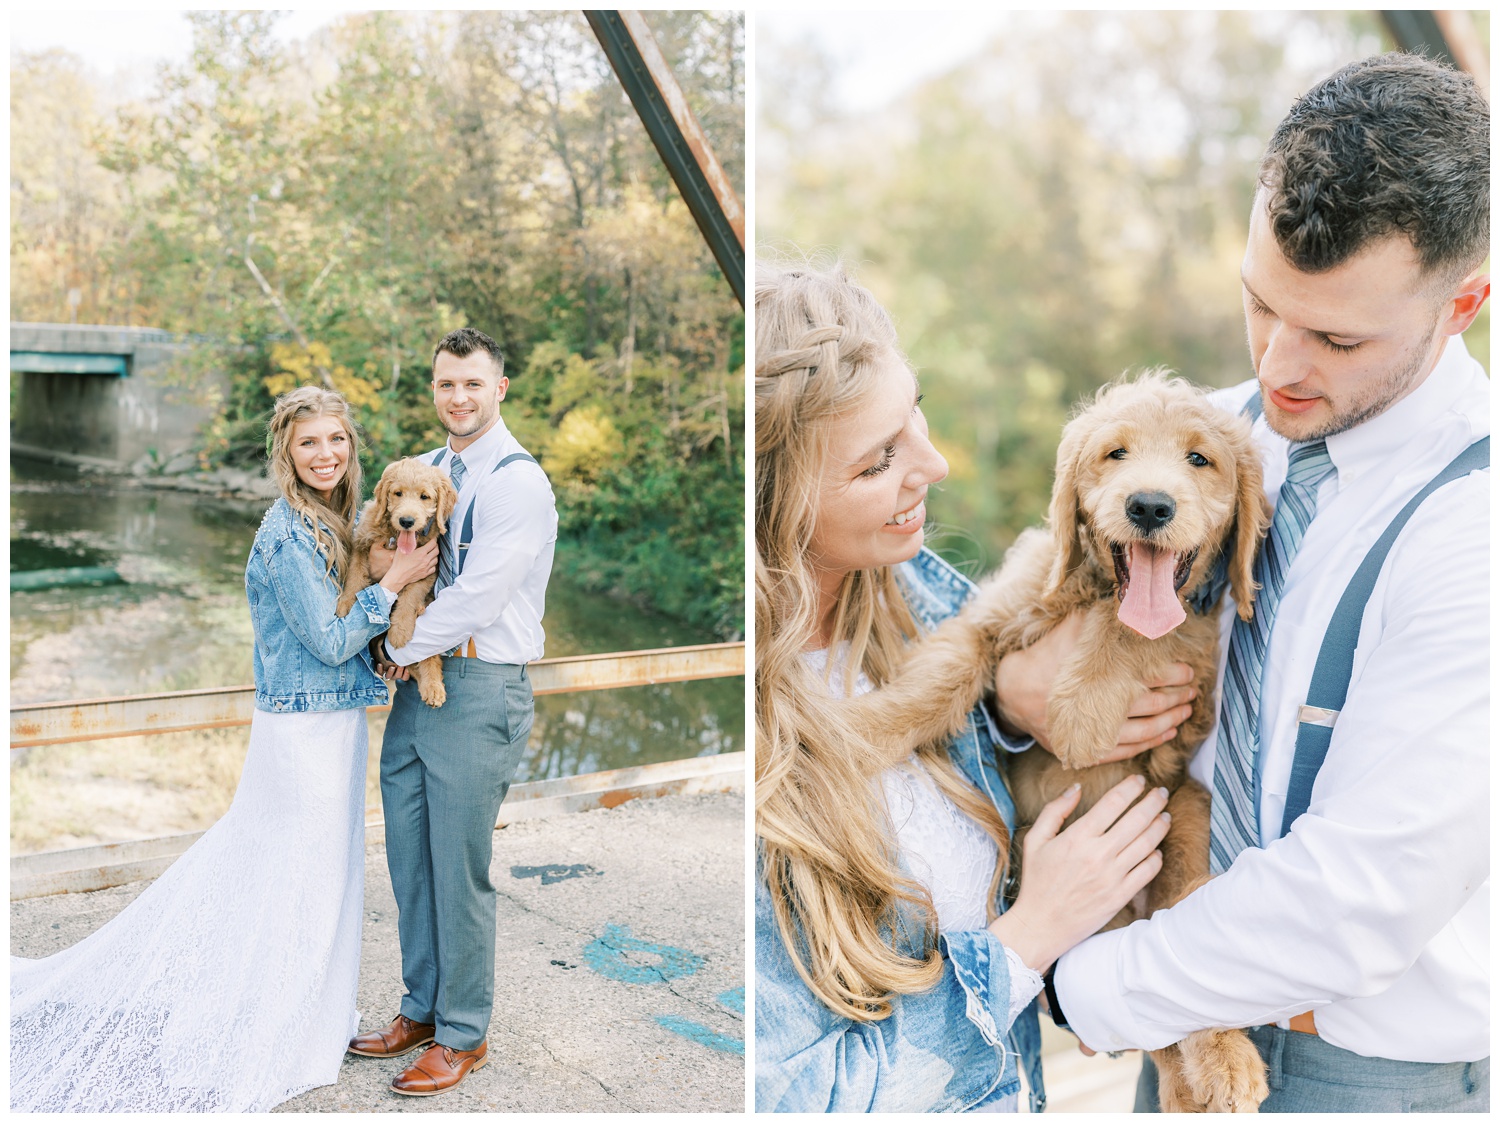 Bride and groom with puppy